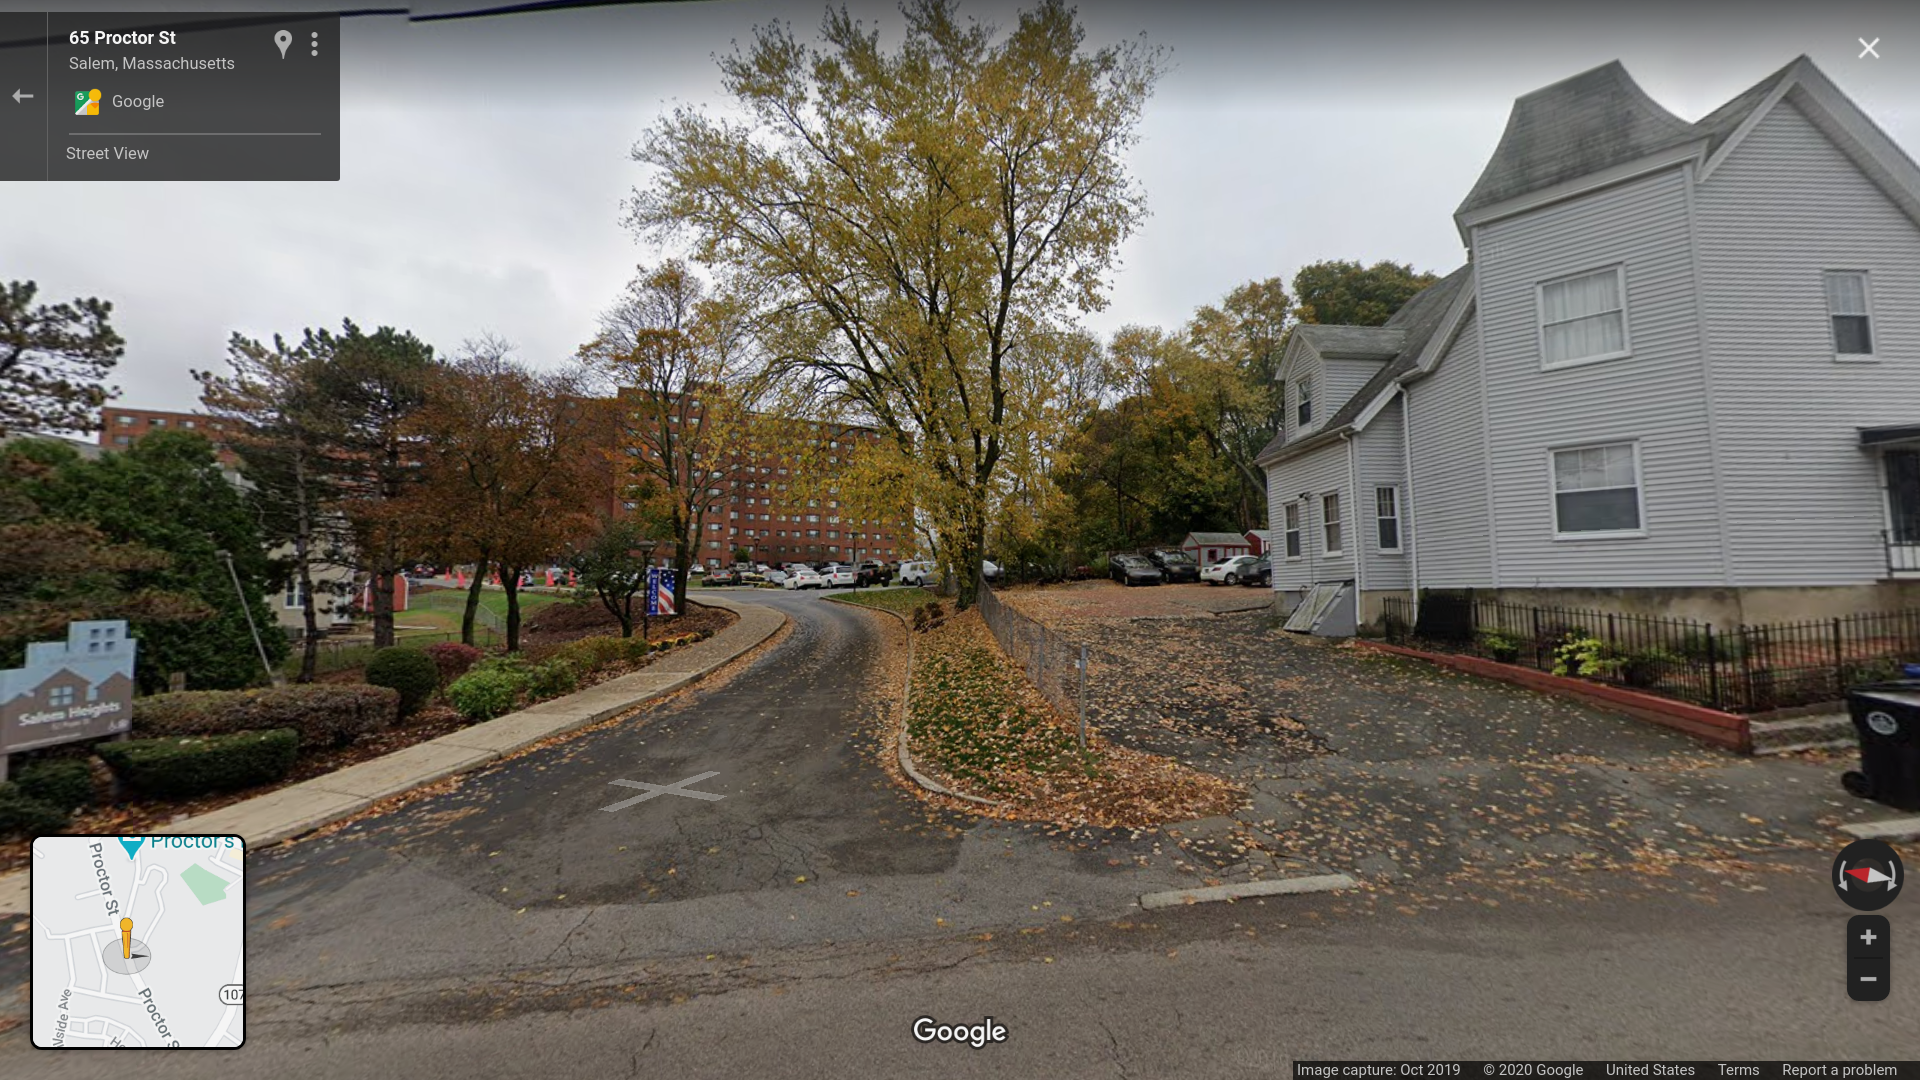 A google street view of the end of the driveway, looking up towards a brick building.